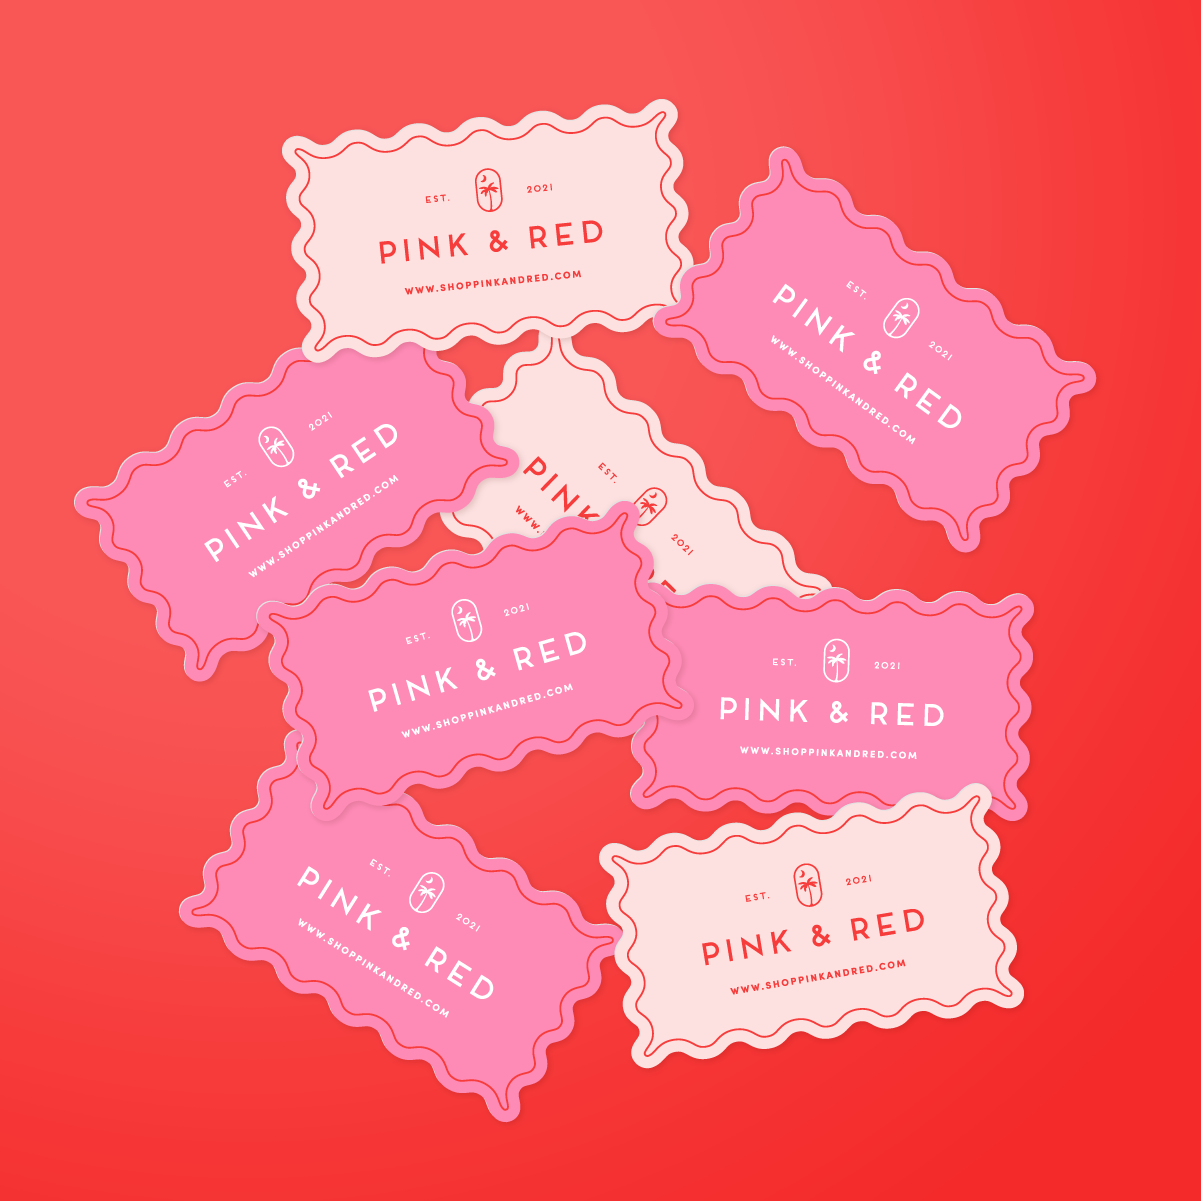 Colorful & Bright Signage and Packaging for Pink & Red Boutique